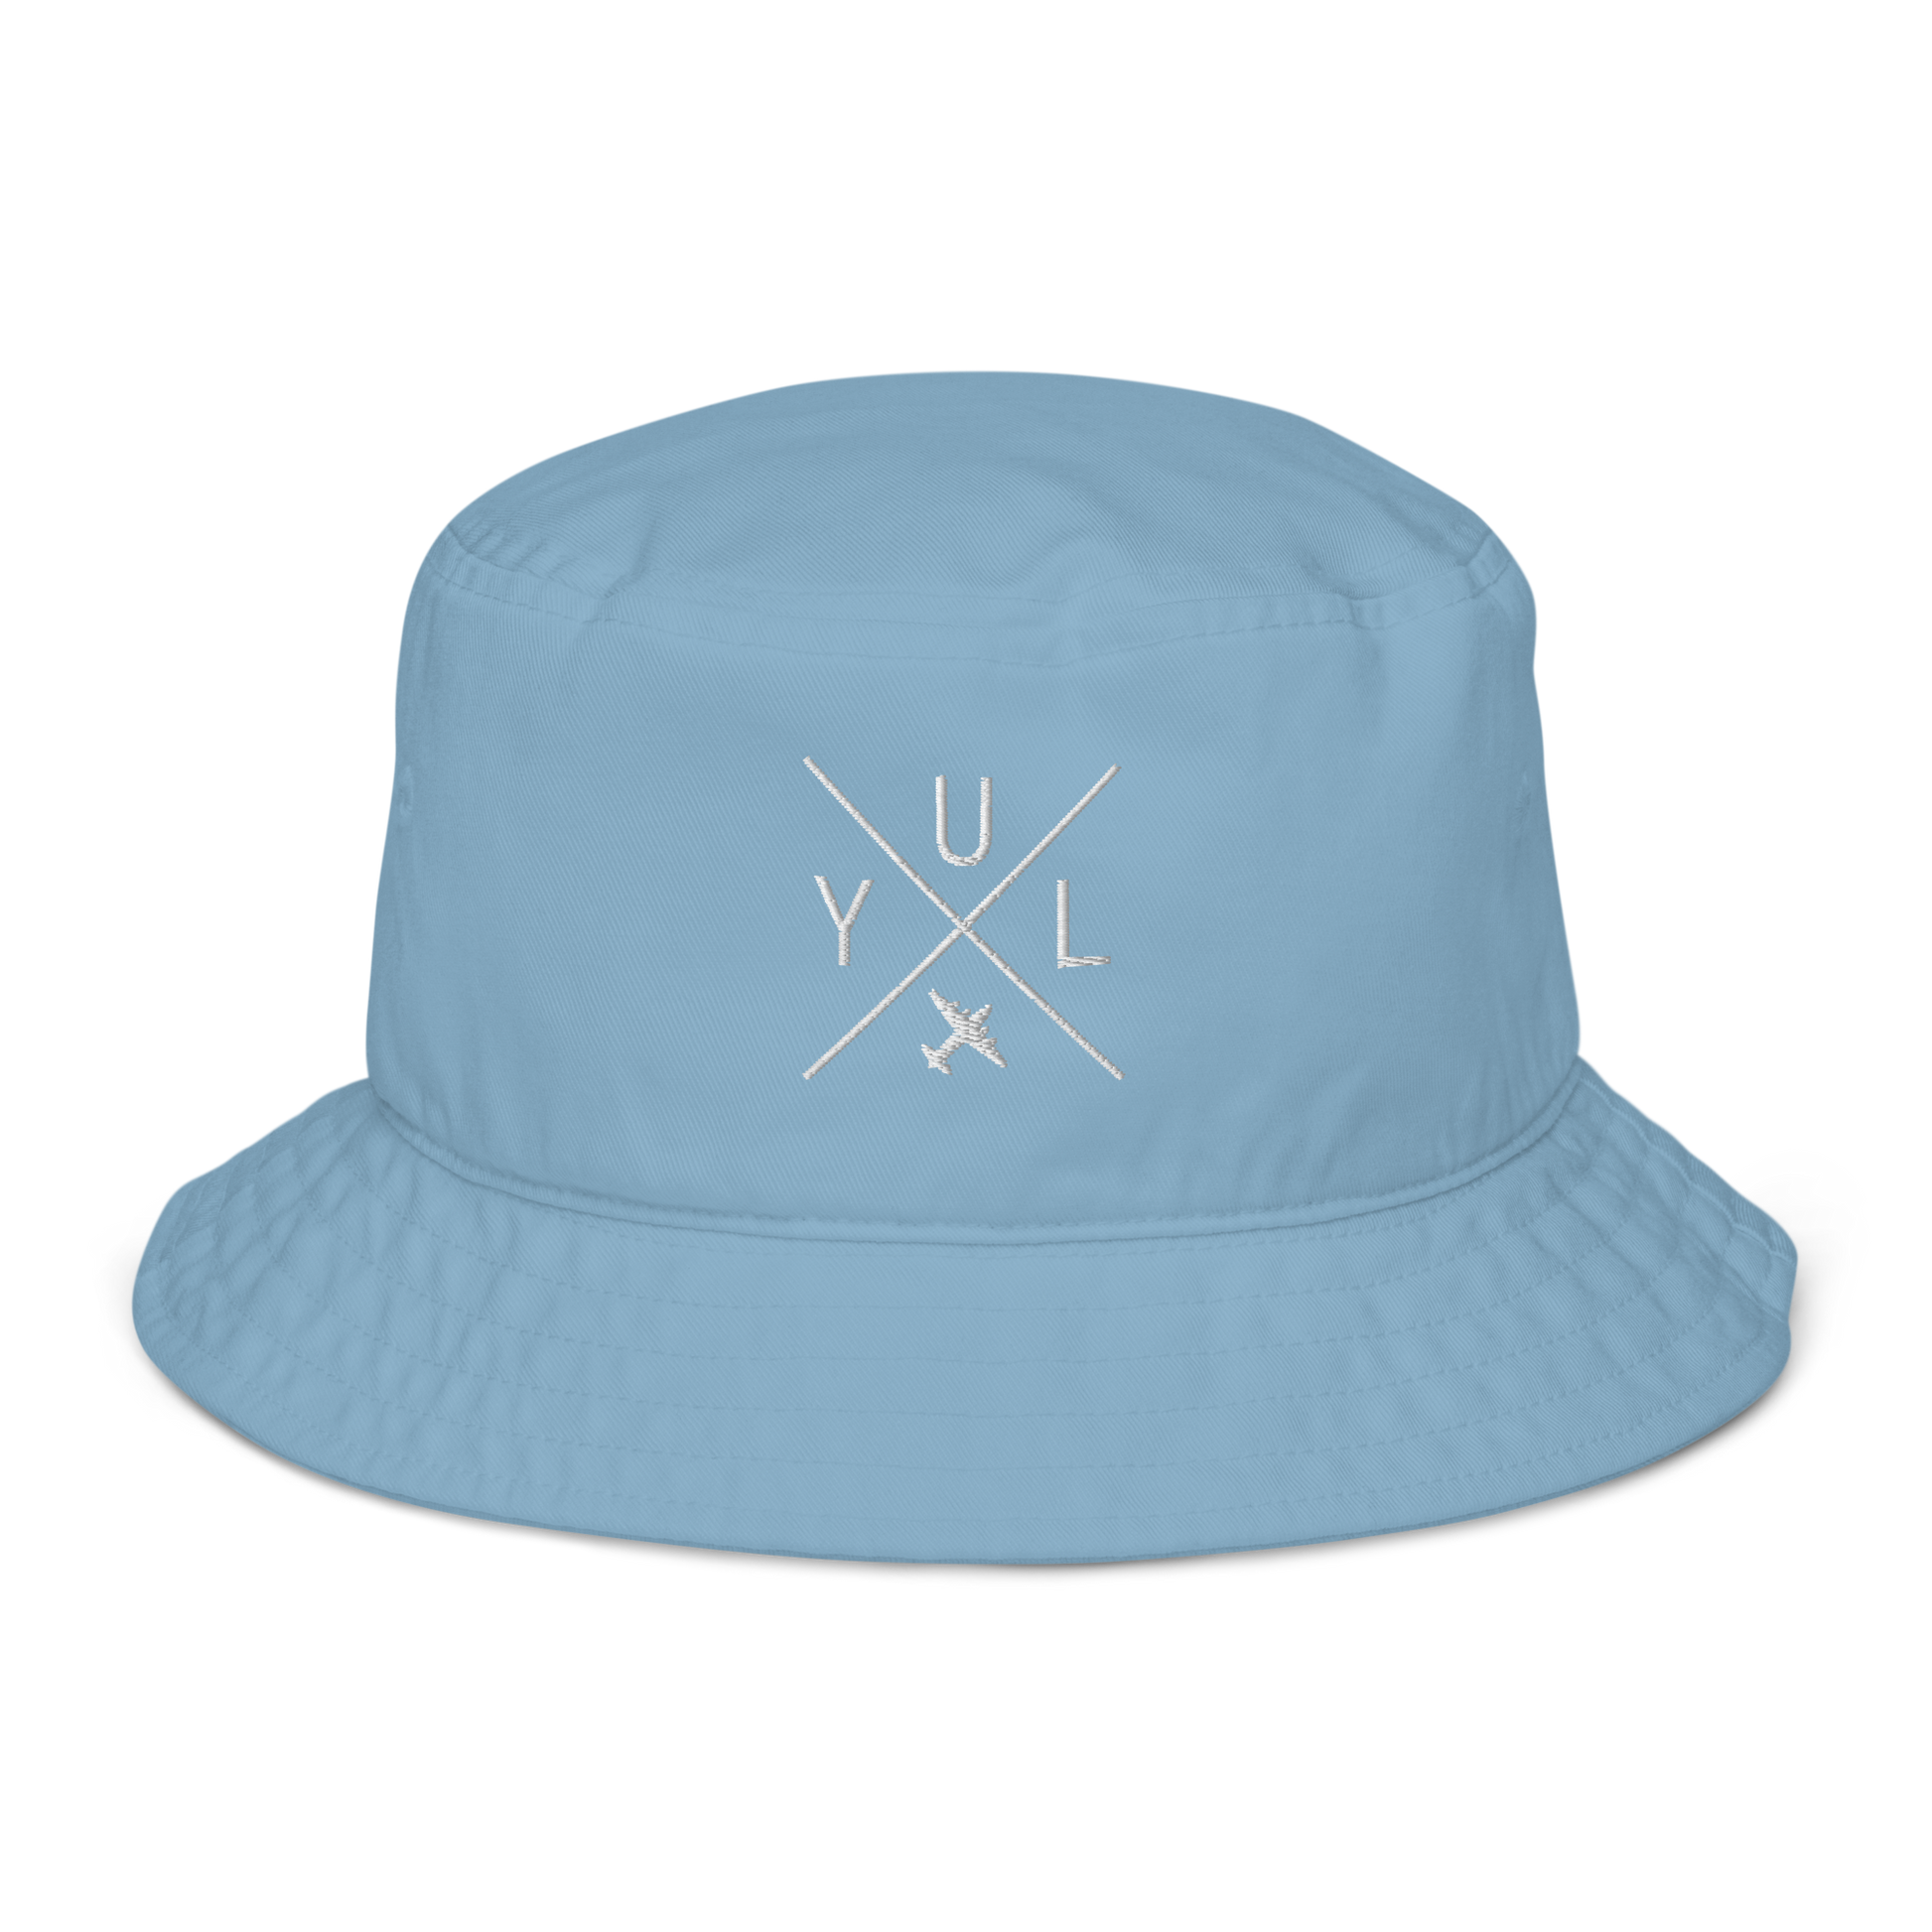 YHM Designs - YUL Montreal Organic Cotton Bucket Hat - Crossed-X Design with Airport Code and Vintage Propliner - White Embroidery - Image 07